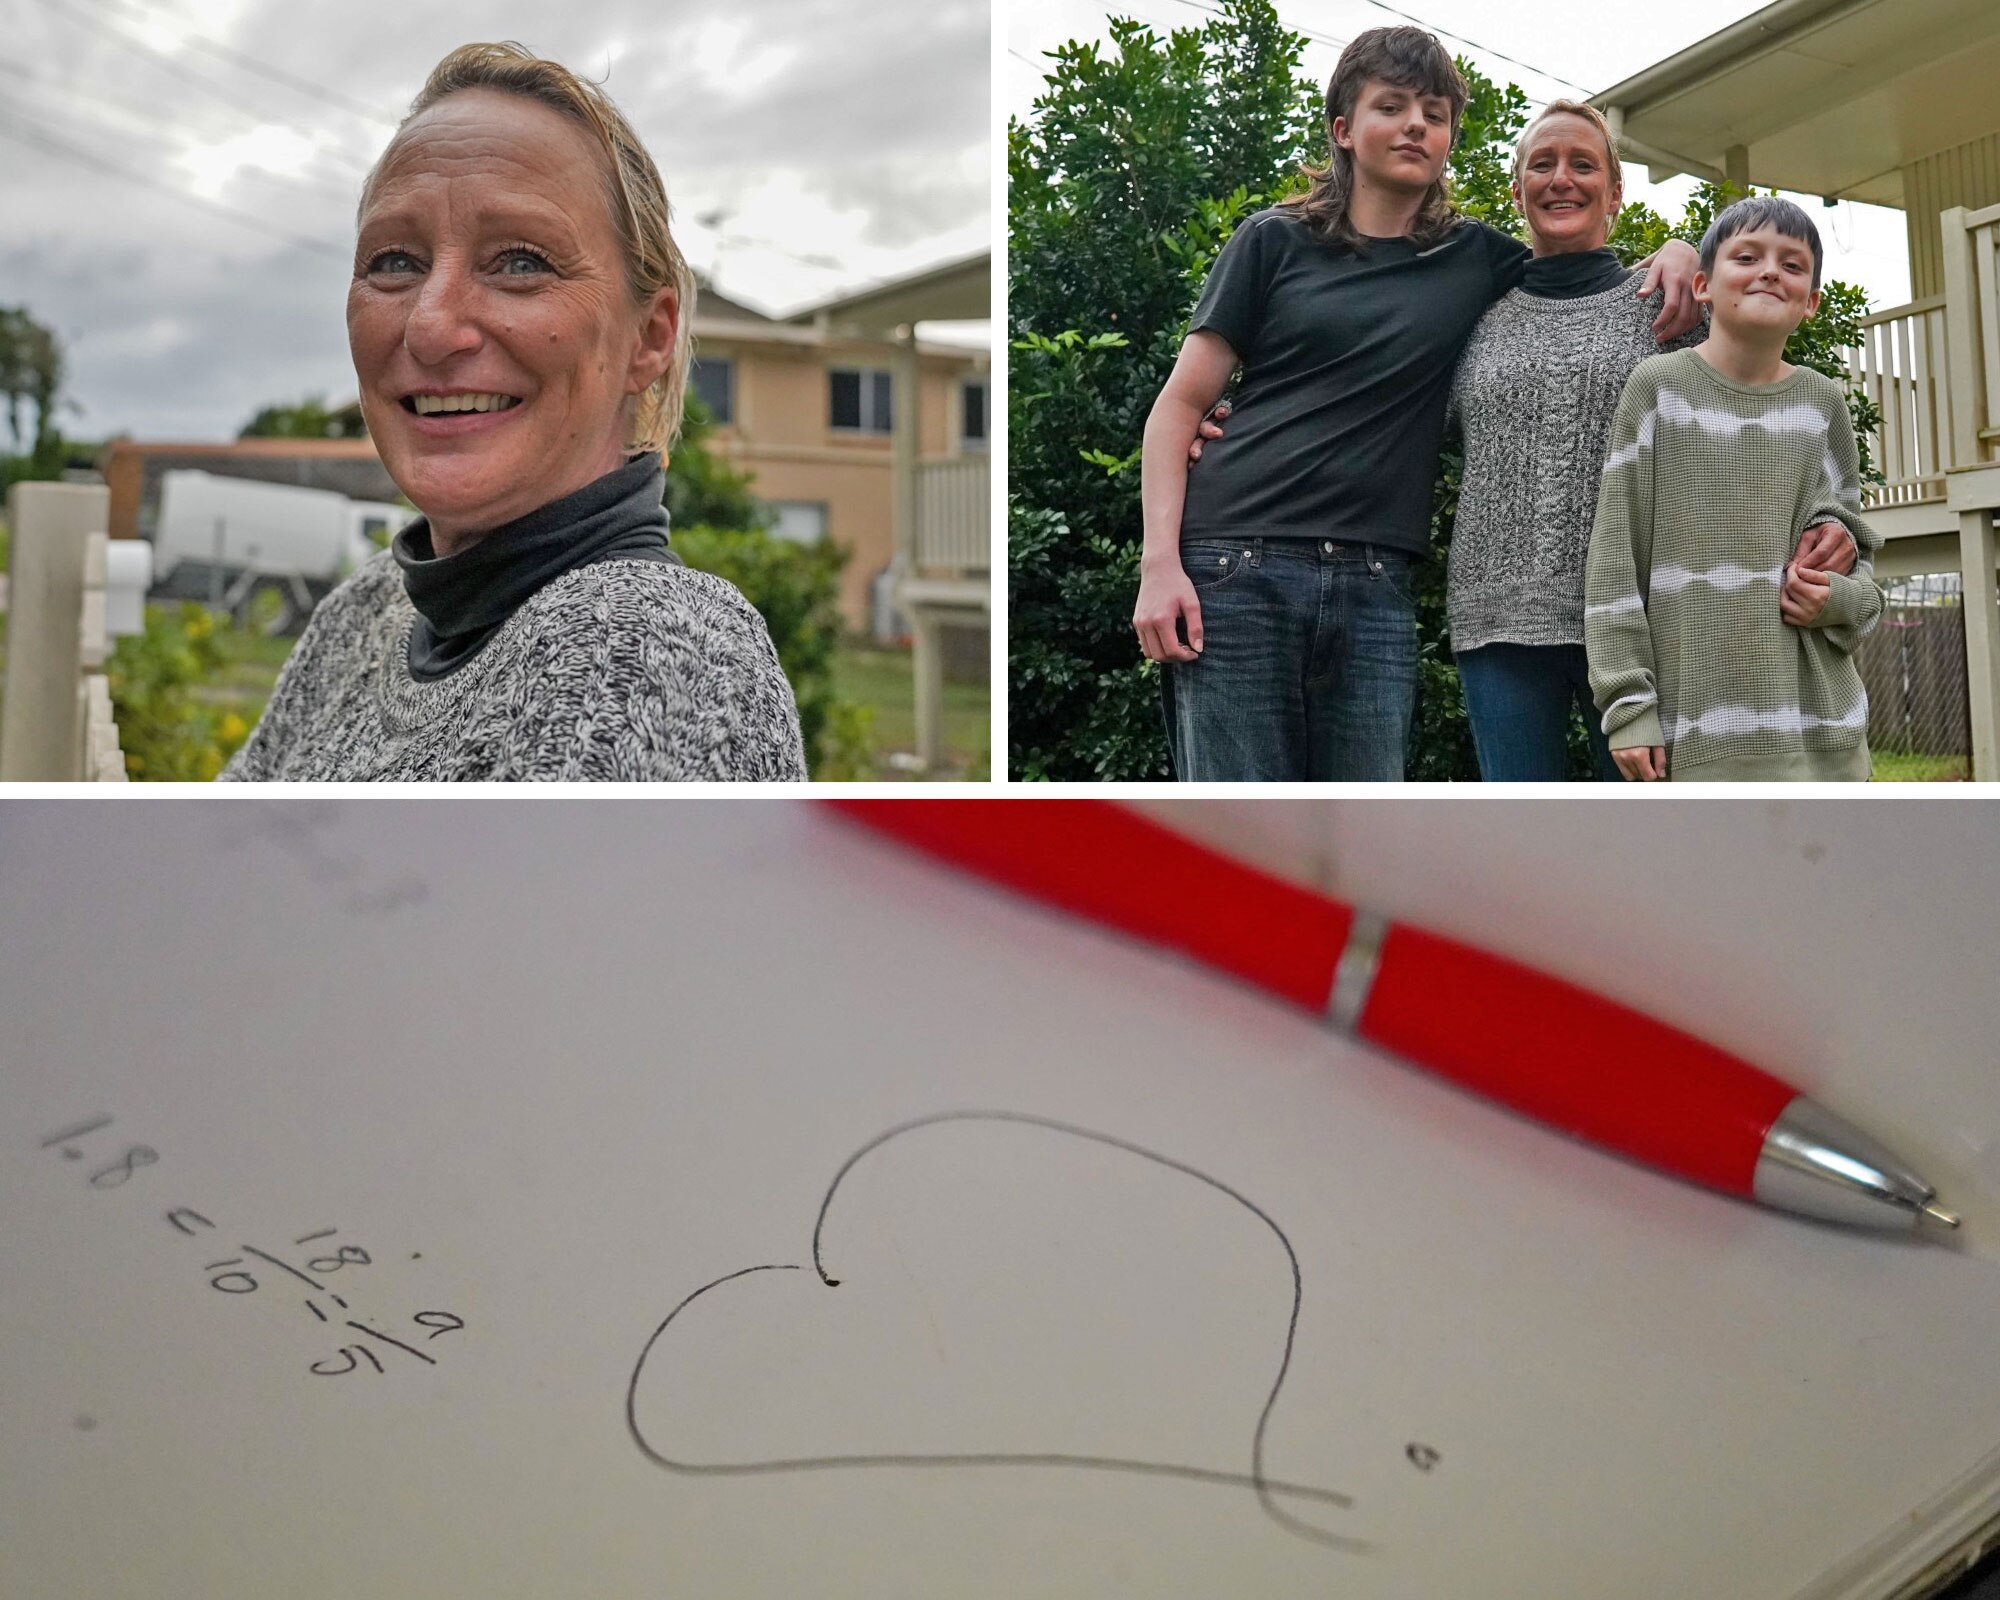 Woman standing at fence, woman and her two sons, drawing of heart